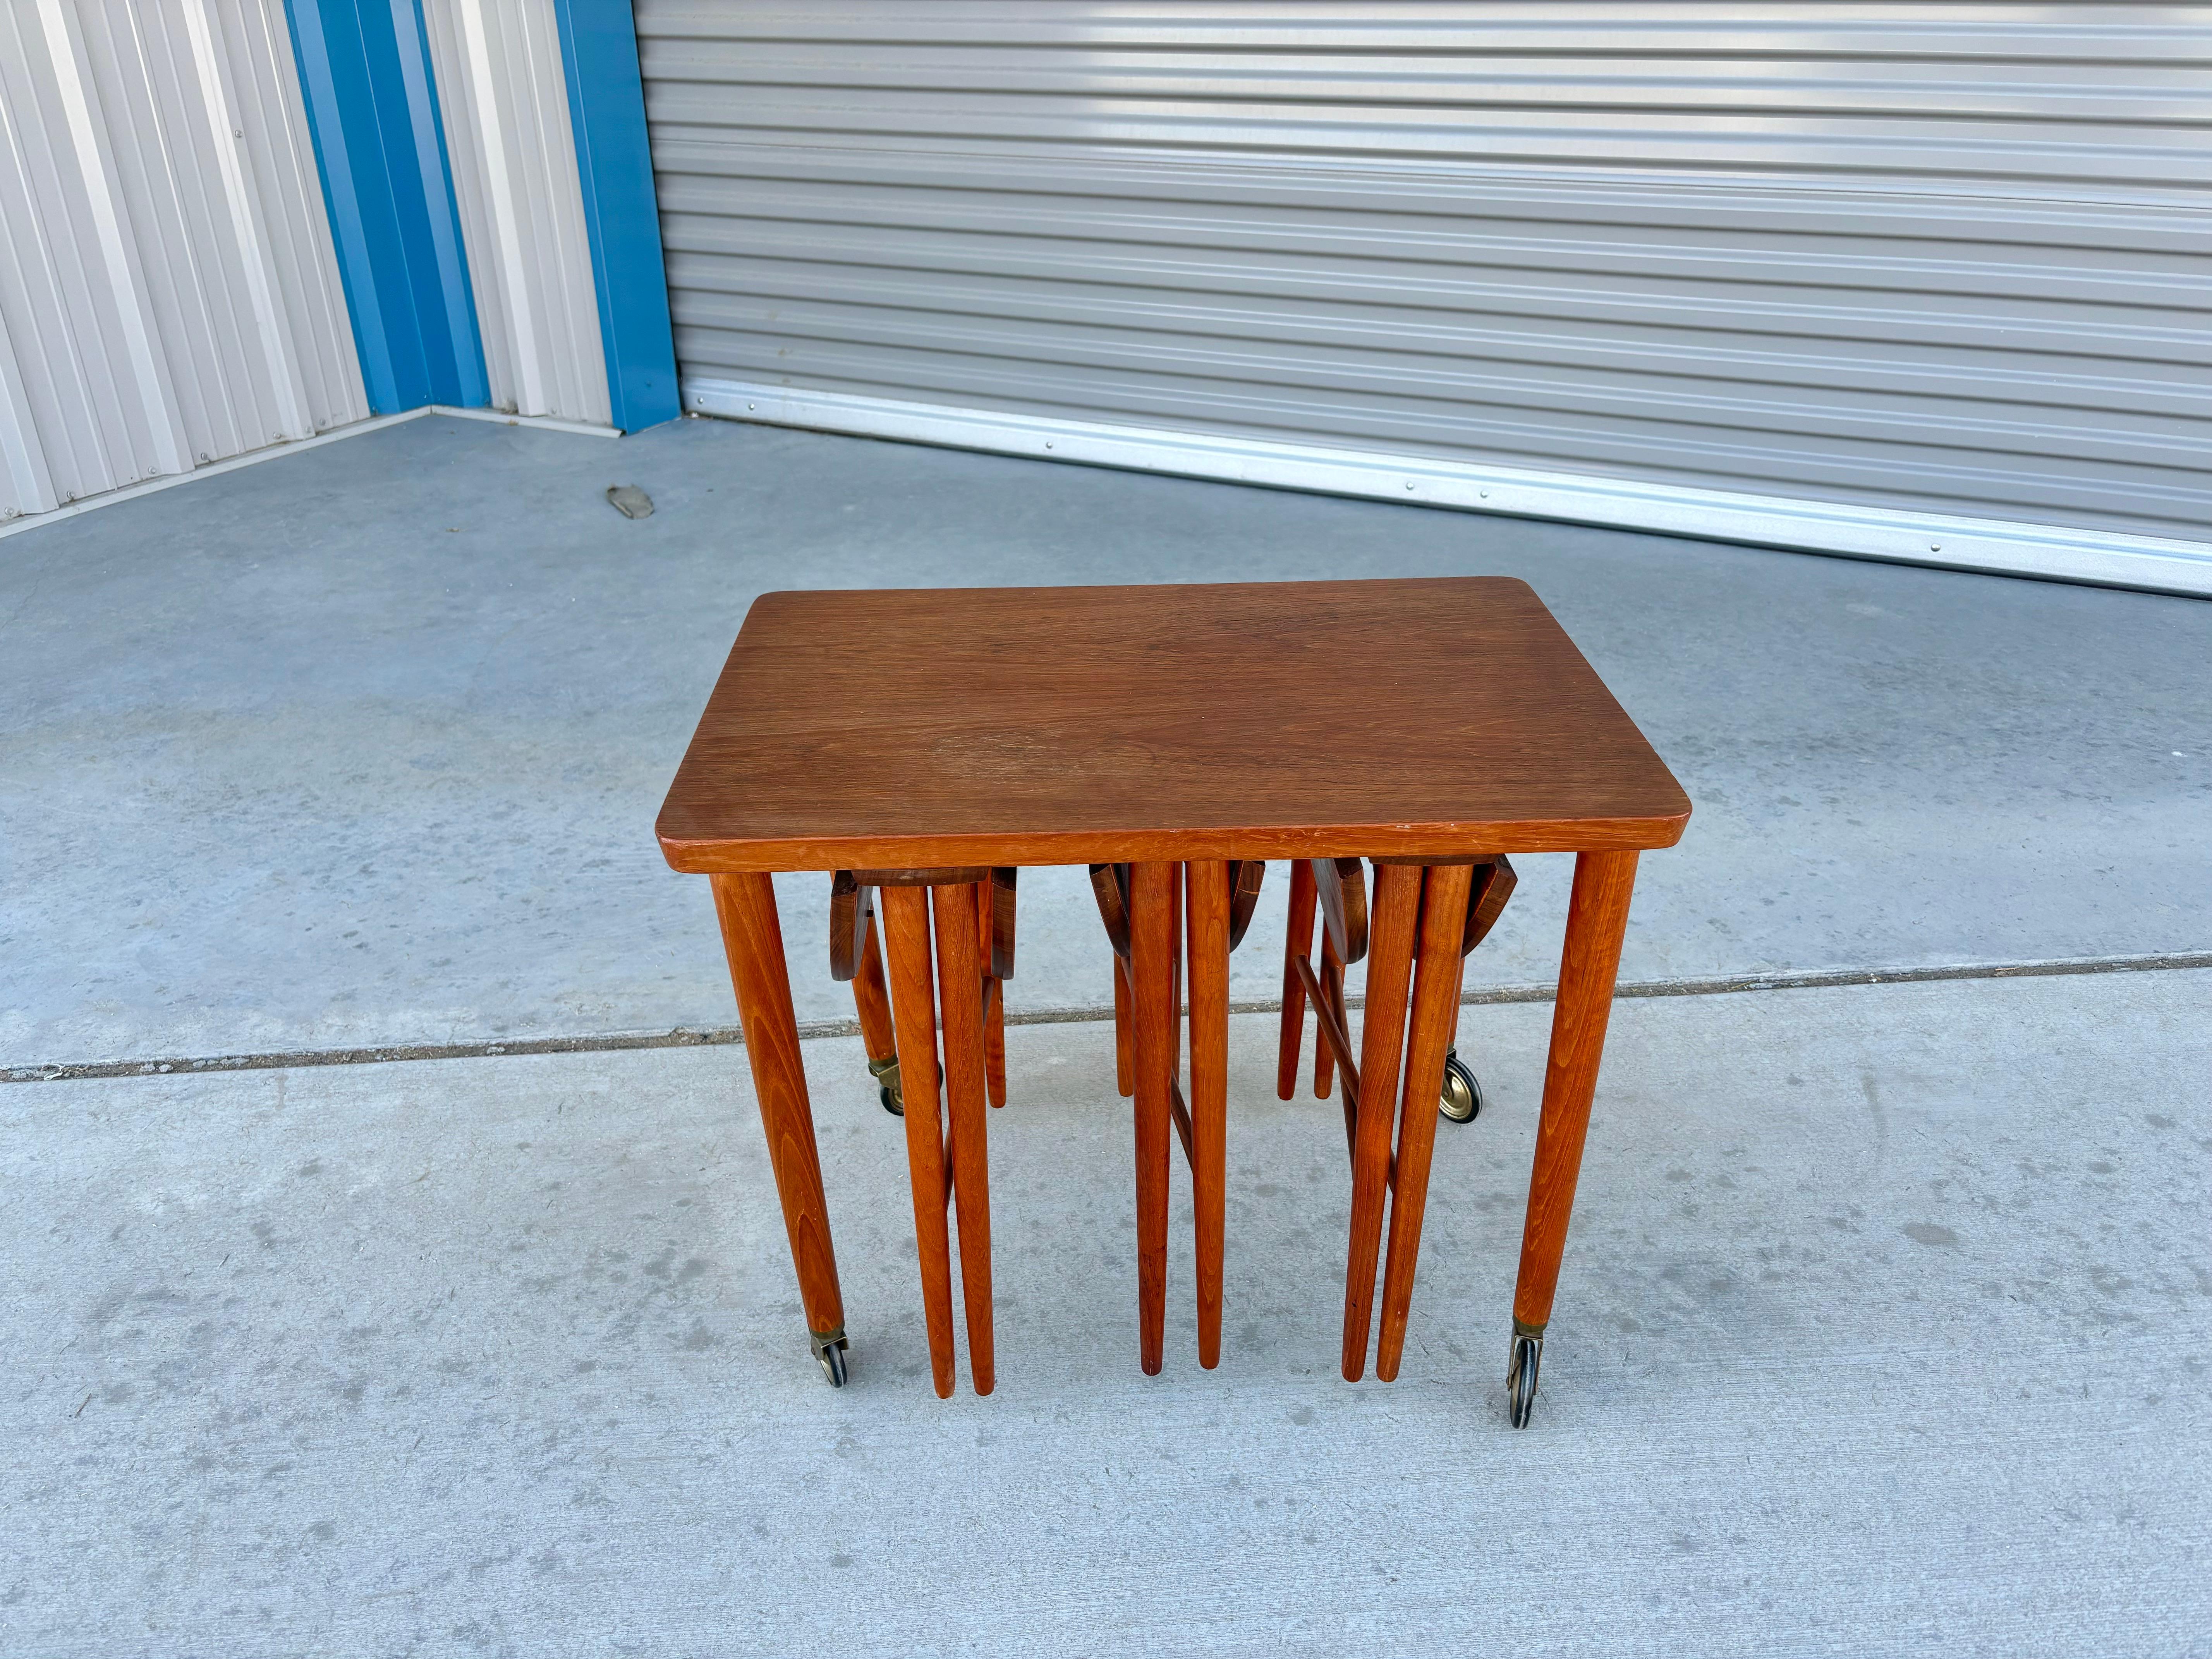 1960s Danish Modern Teak Nesting Tables by Paul Hundevad - a Pair In Good Condition For Sale In North Hollywood, CA